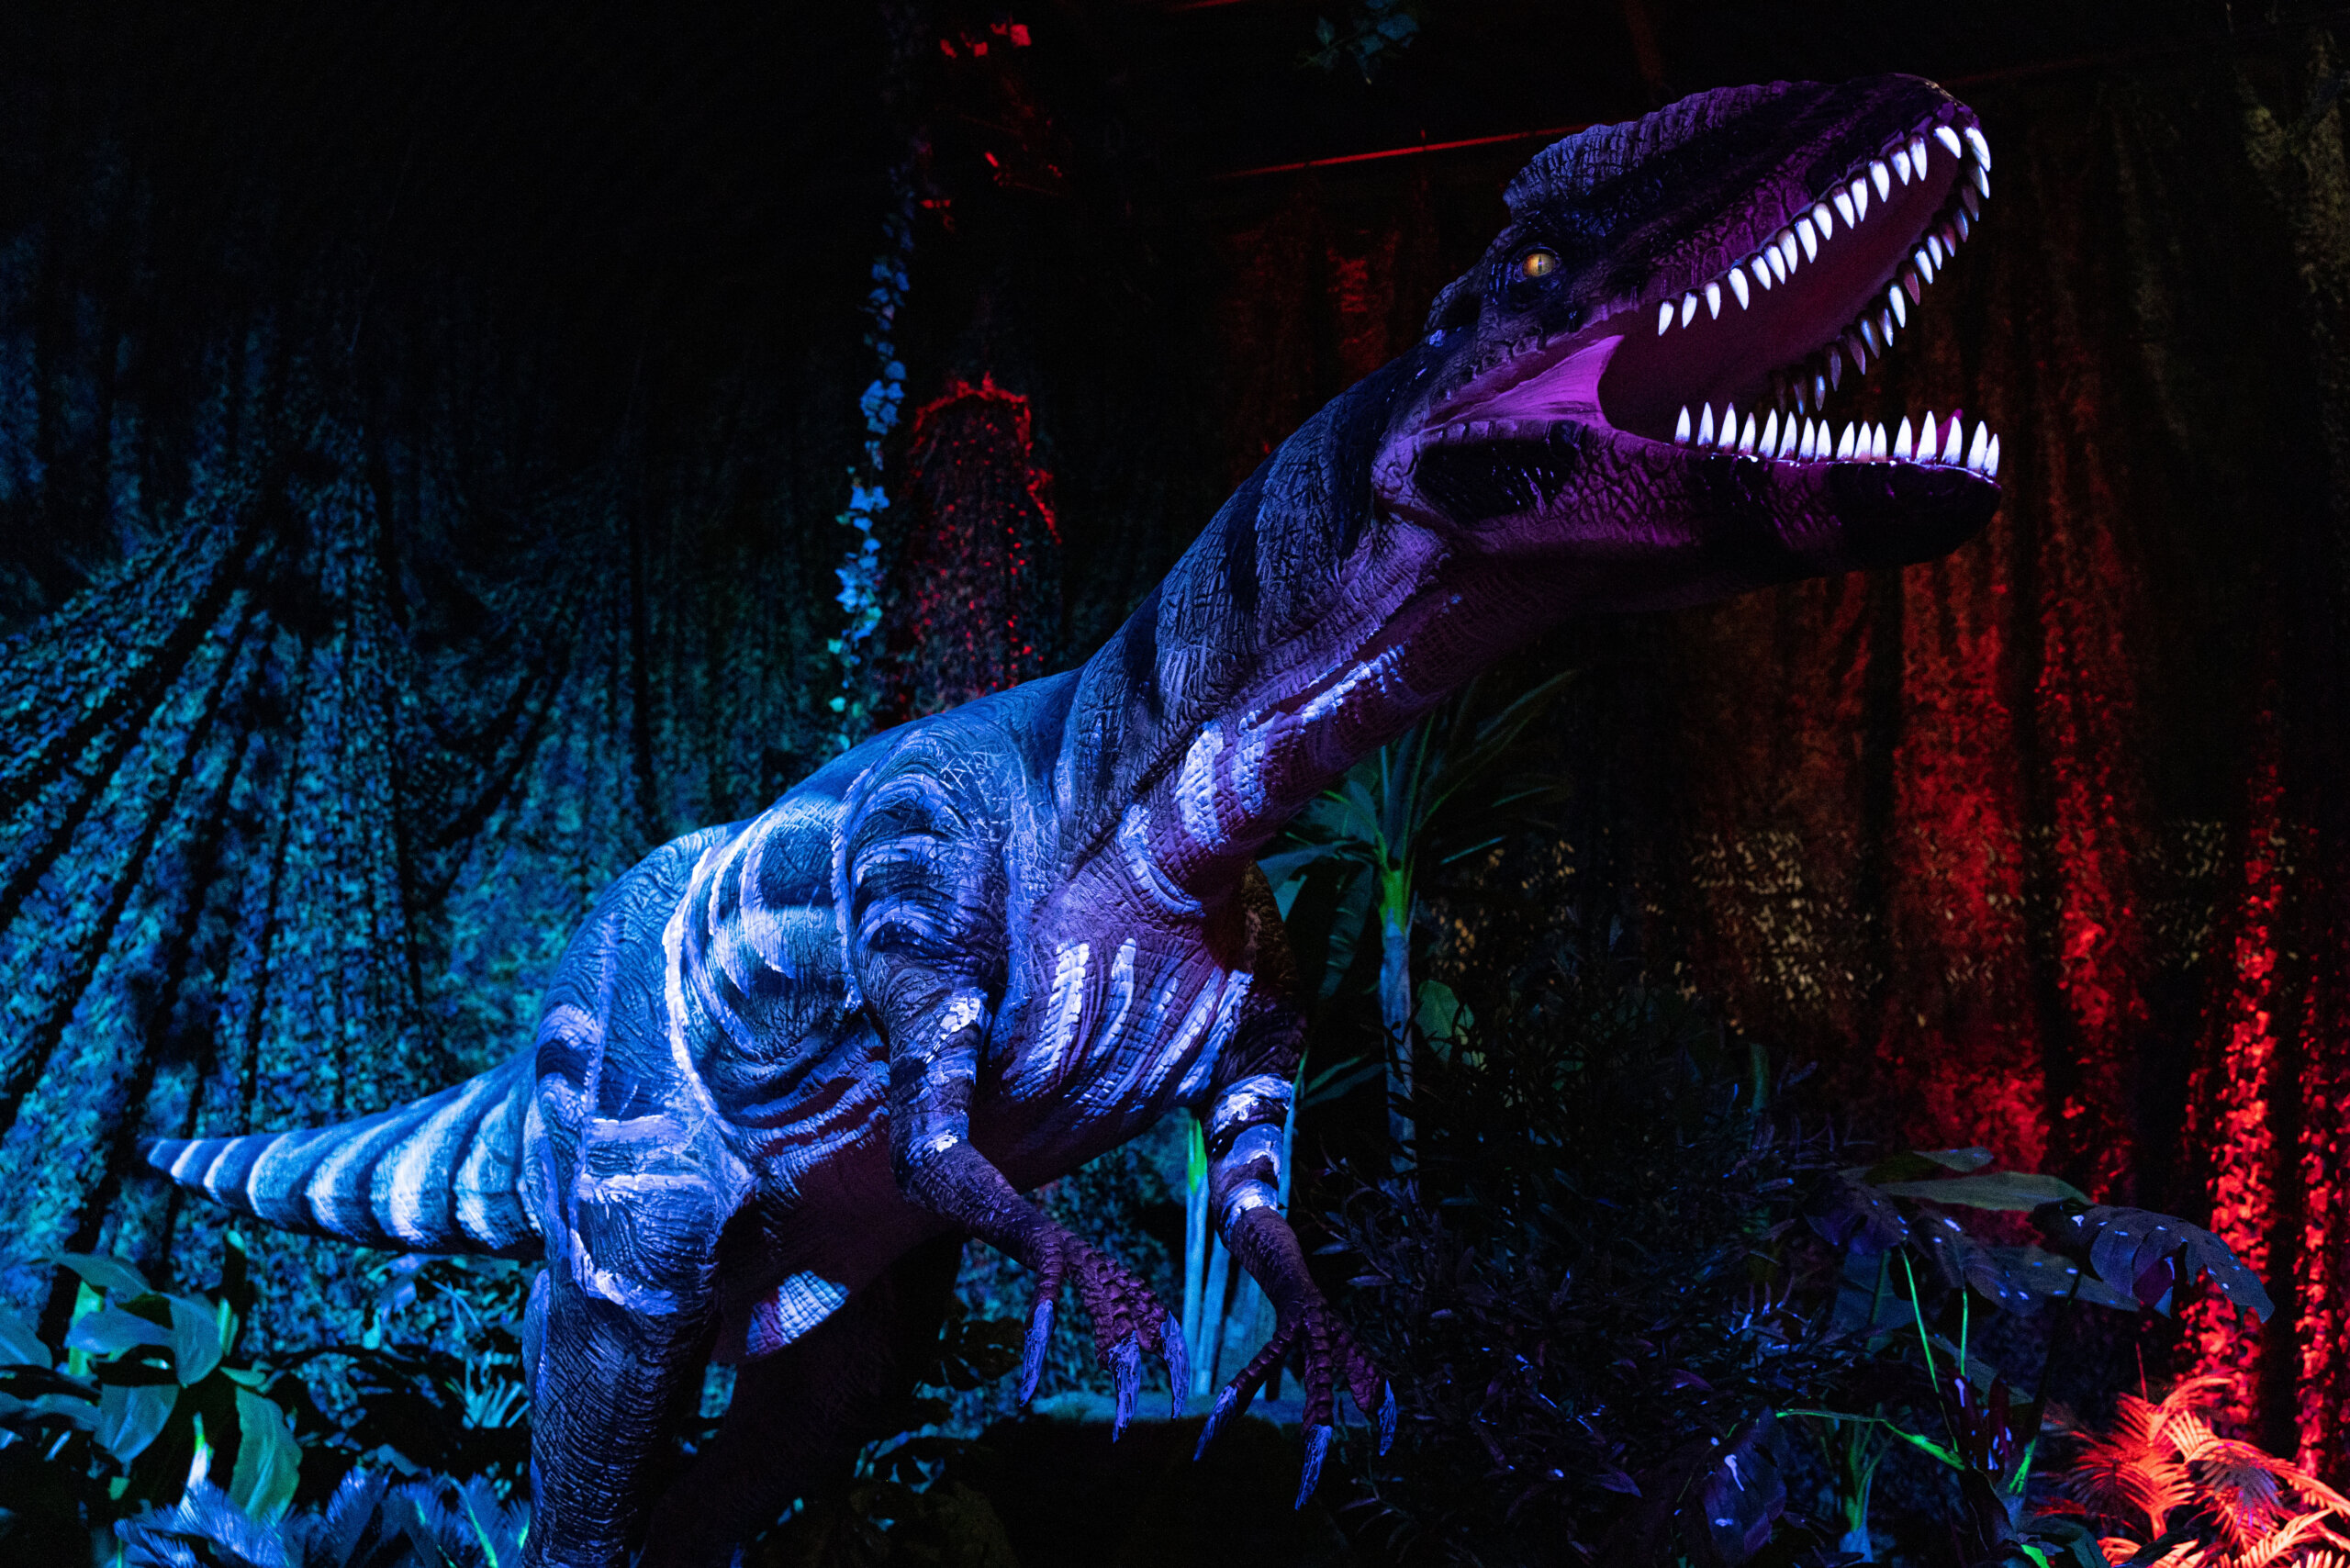 Dinos Alive Exhibit: An Immersive Experience - Los Angeles